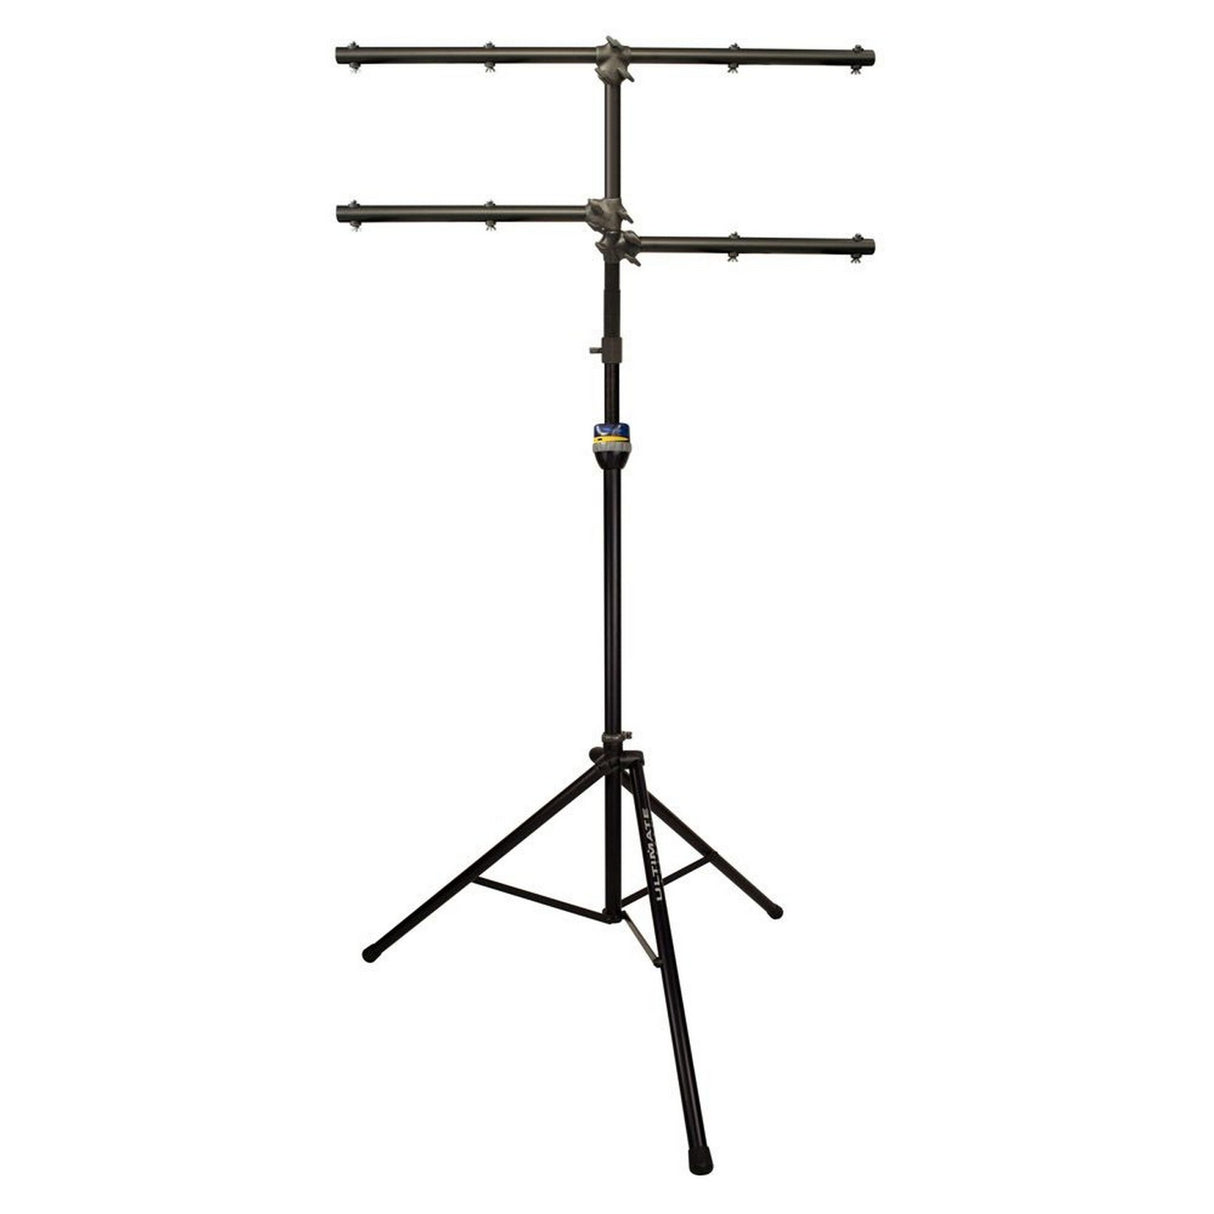 Ultimate Support LT-99B LT Multi-Tiered Heavy-Duty Lighting Tree with TeleLock Lift